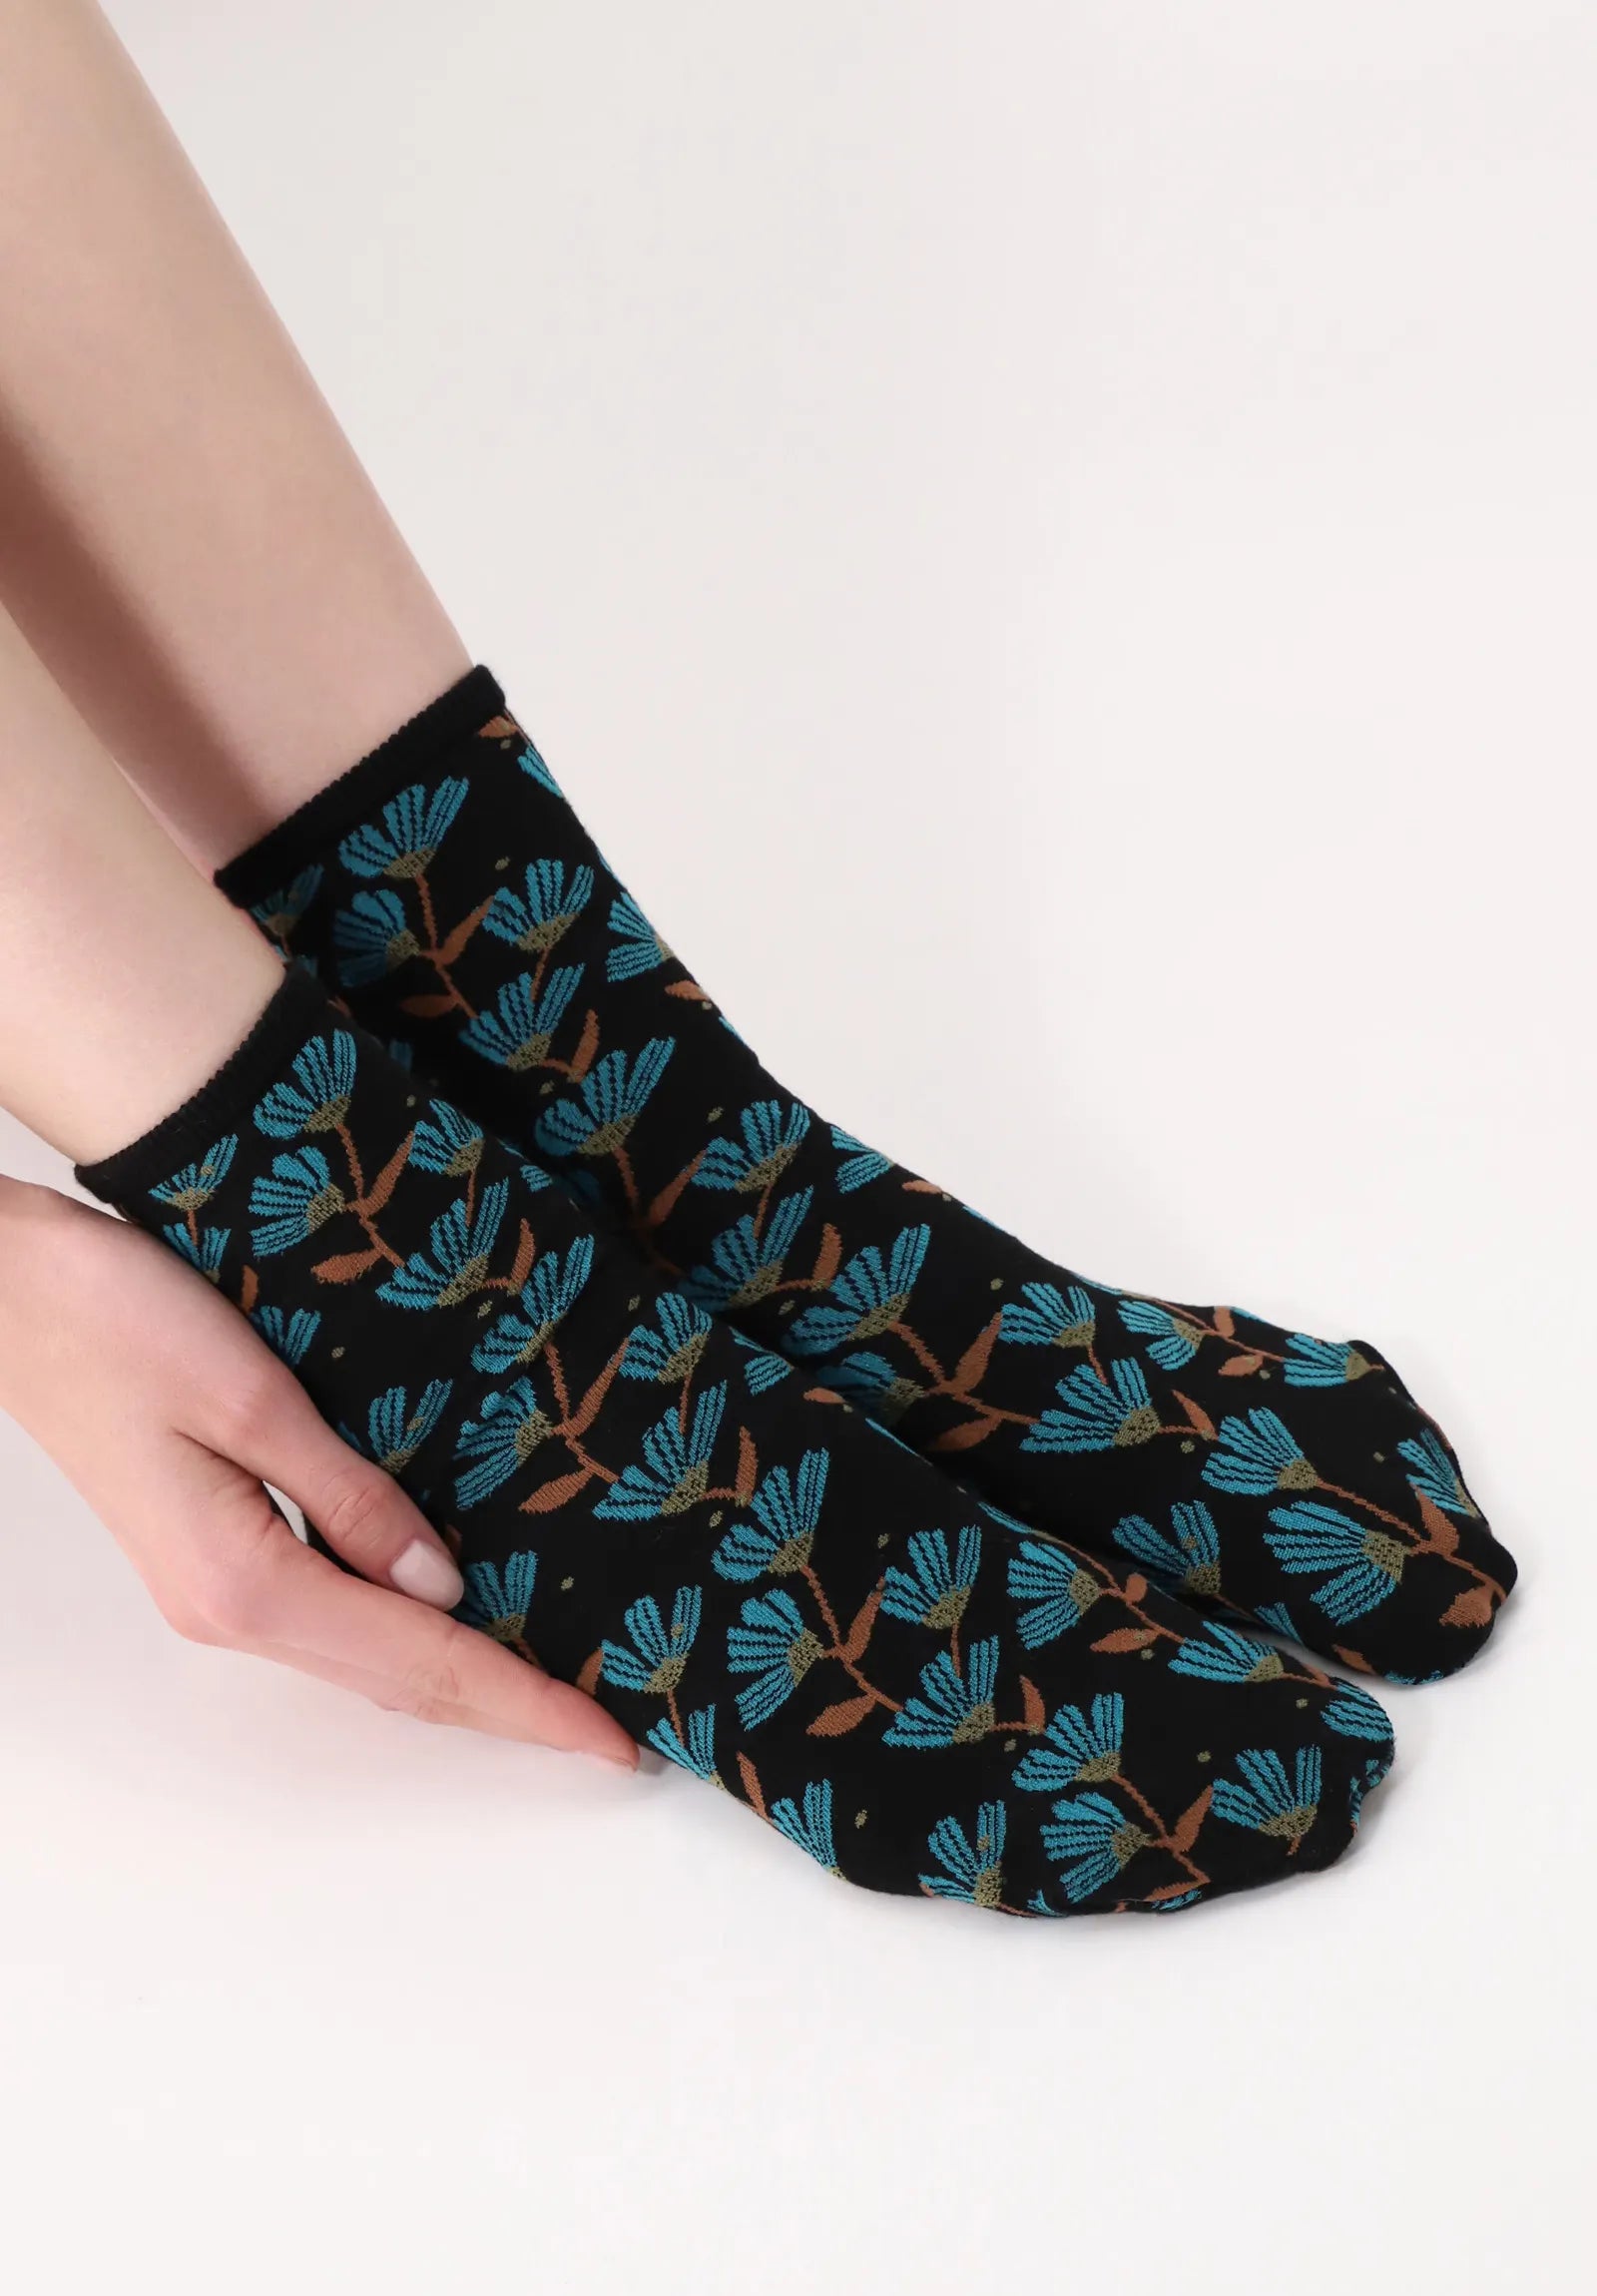 Oroblù Bloom Sock - Black viscose mix fashion ankle socks with an all over woven floral pattern in teal blue, rusty brown and olive green.